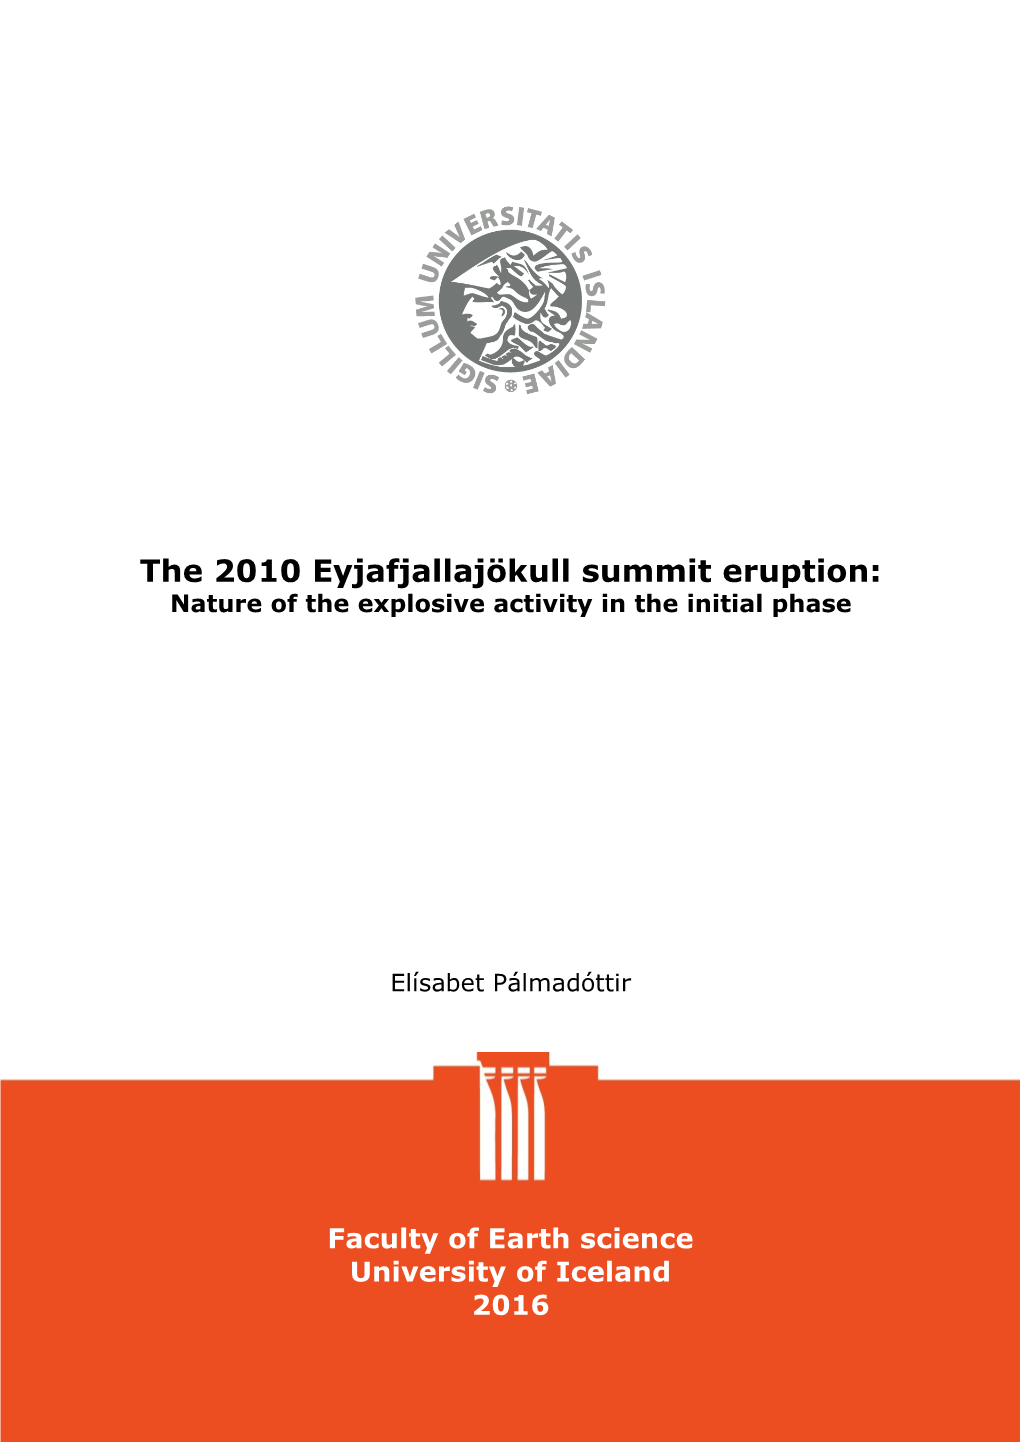 The 2010 Eyjafjallajökull Summit Eruption: Nature of the Explosive Activity in the Initial Phase